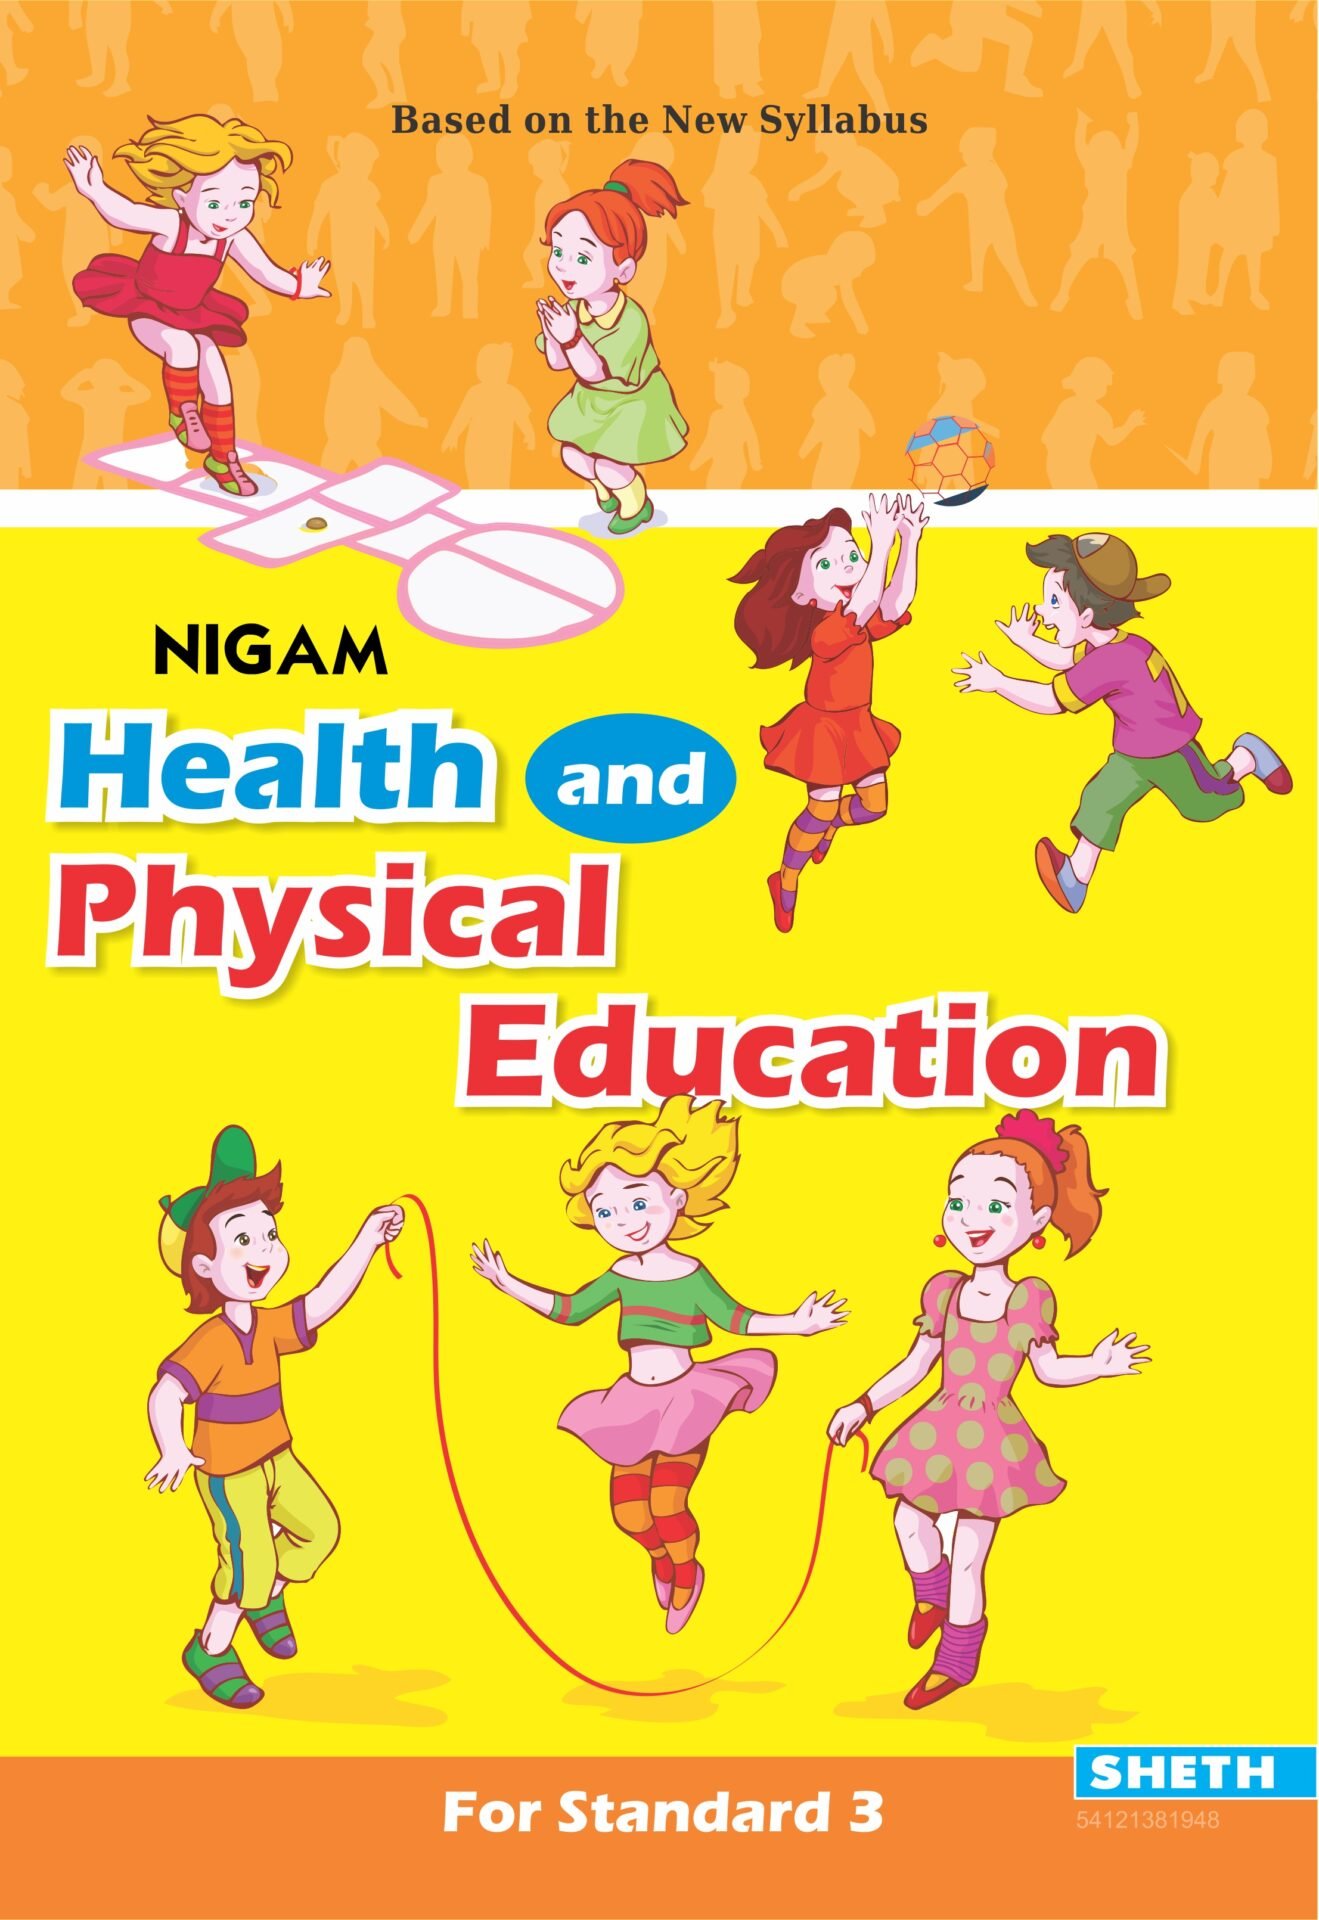 Nigam Health and Physical Education Standard 3 1